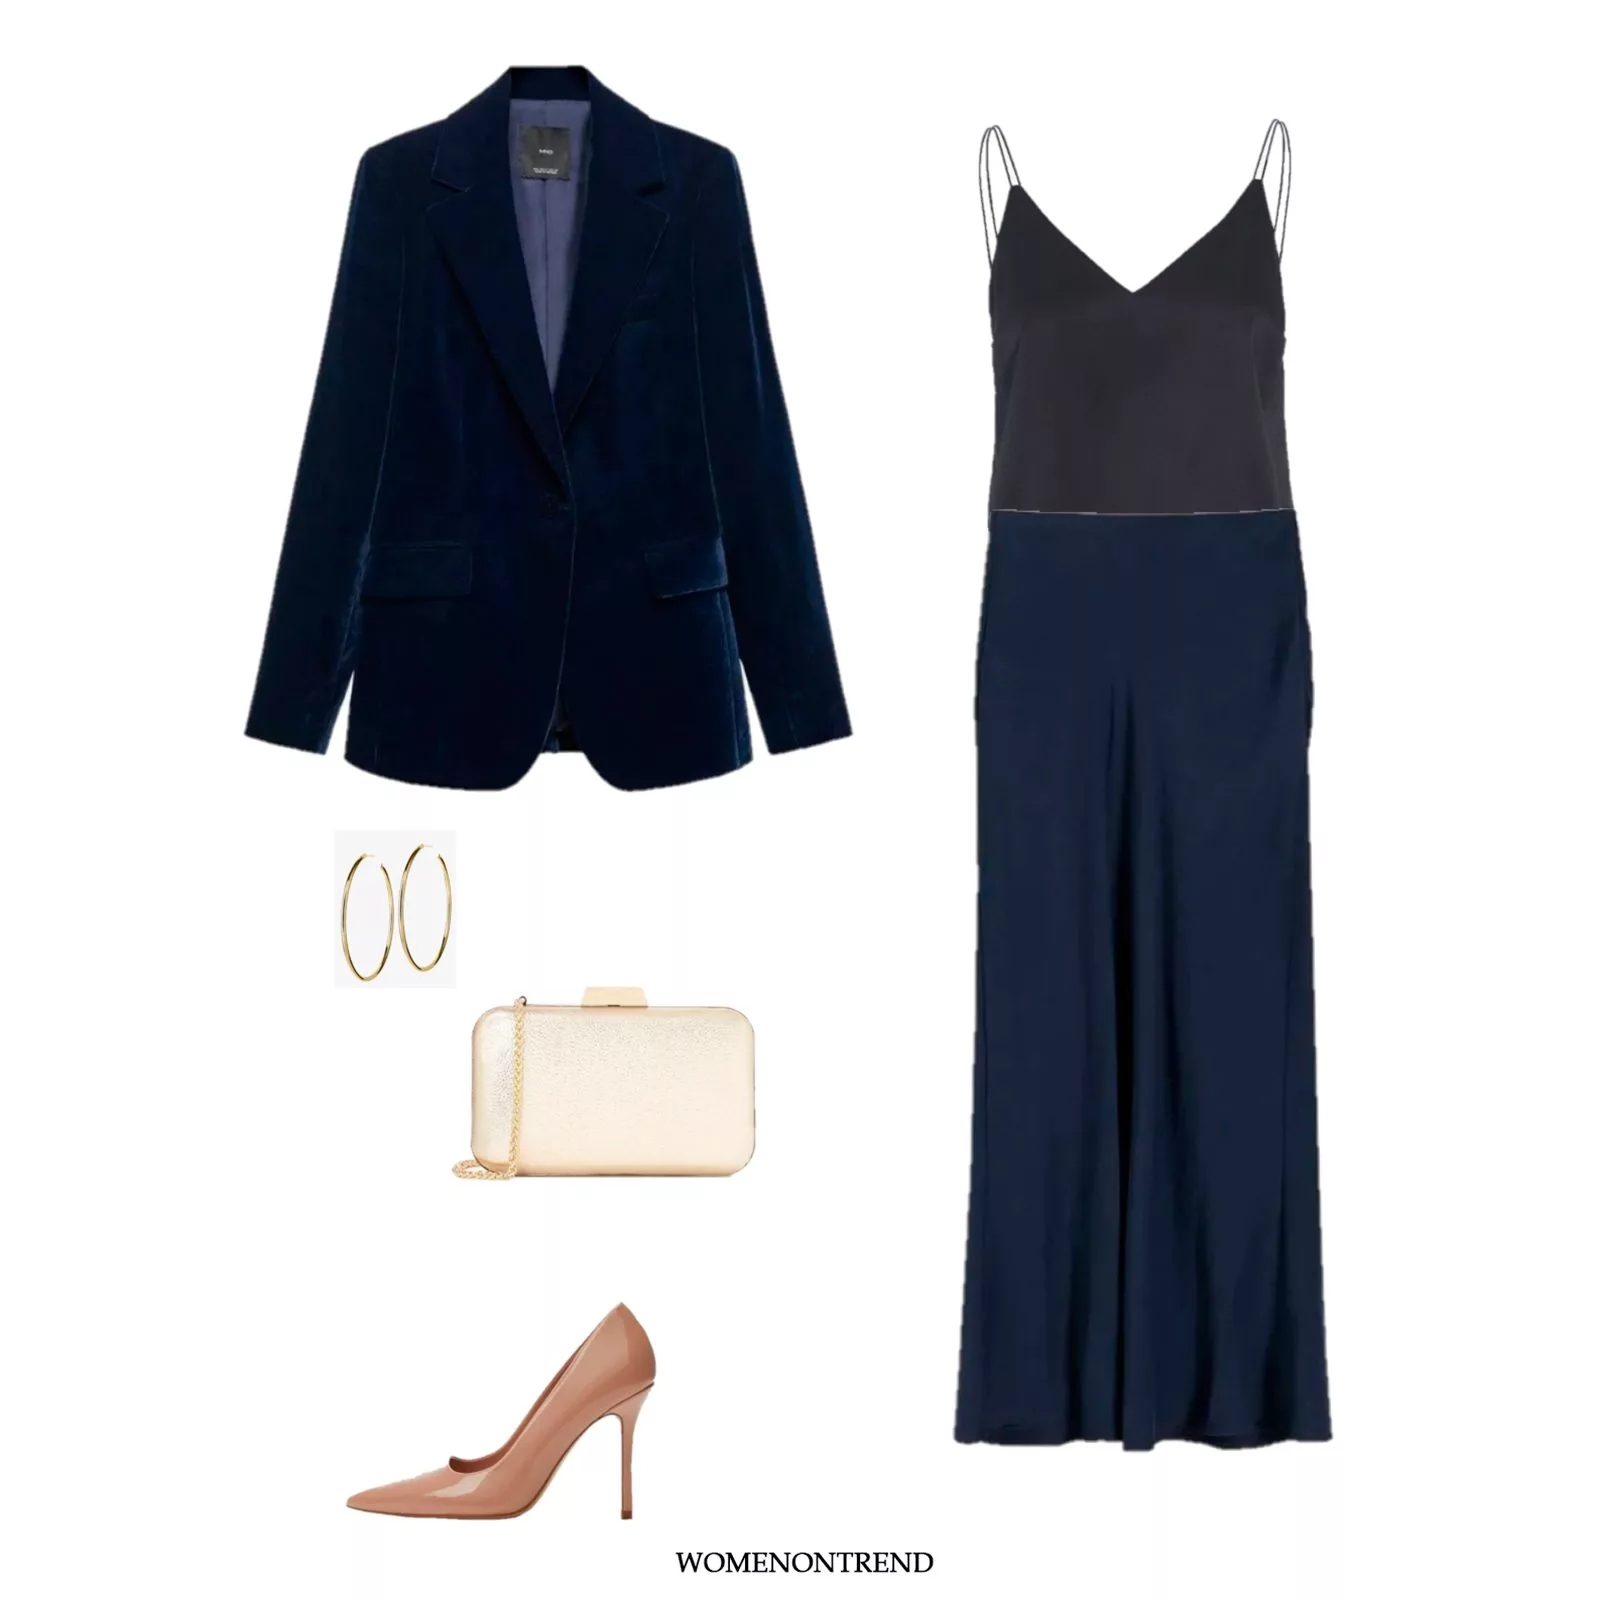 Look 16: Chic Charm in Midnight Blue and Camel Hue